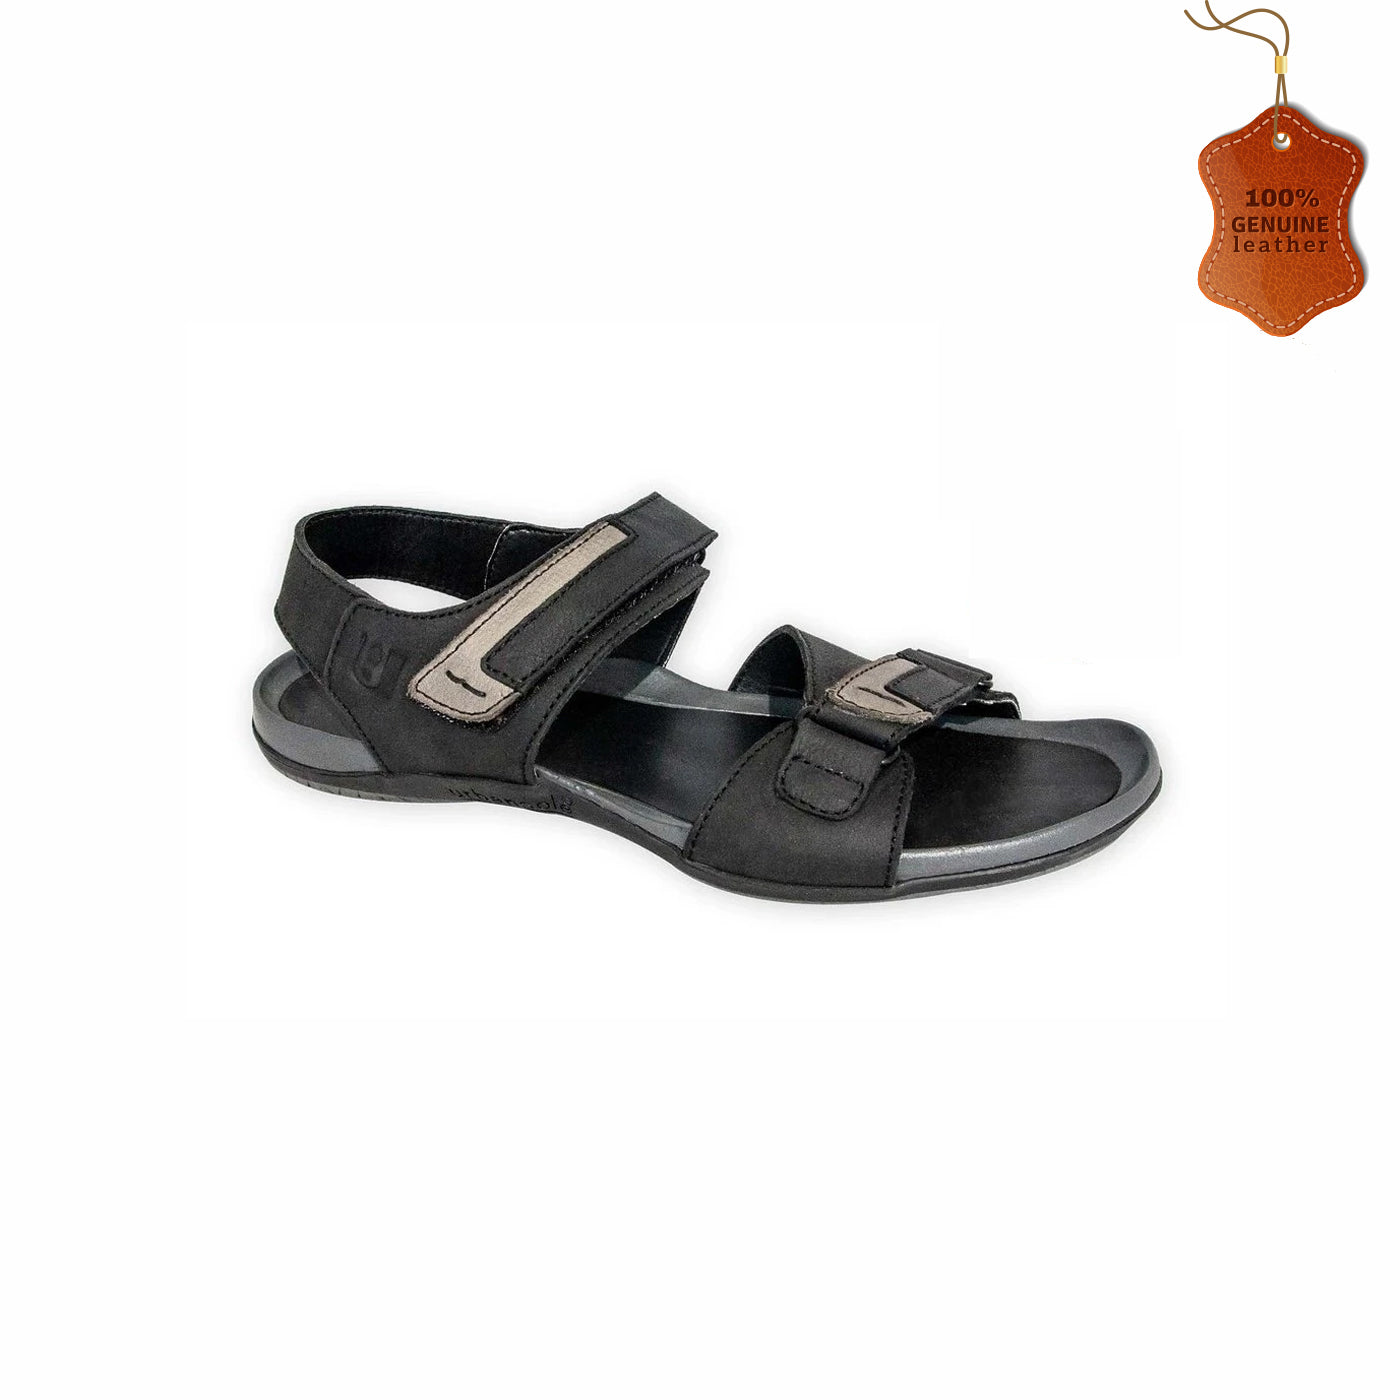 Double Strap Leather Sandals for Men